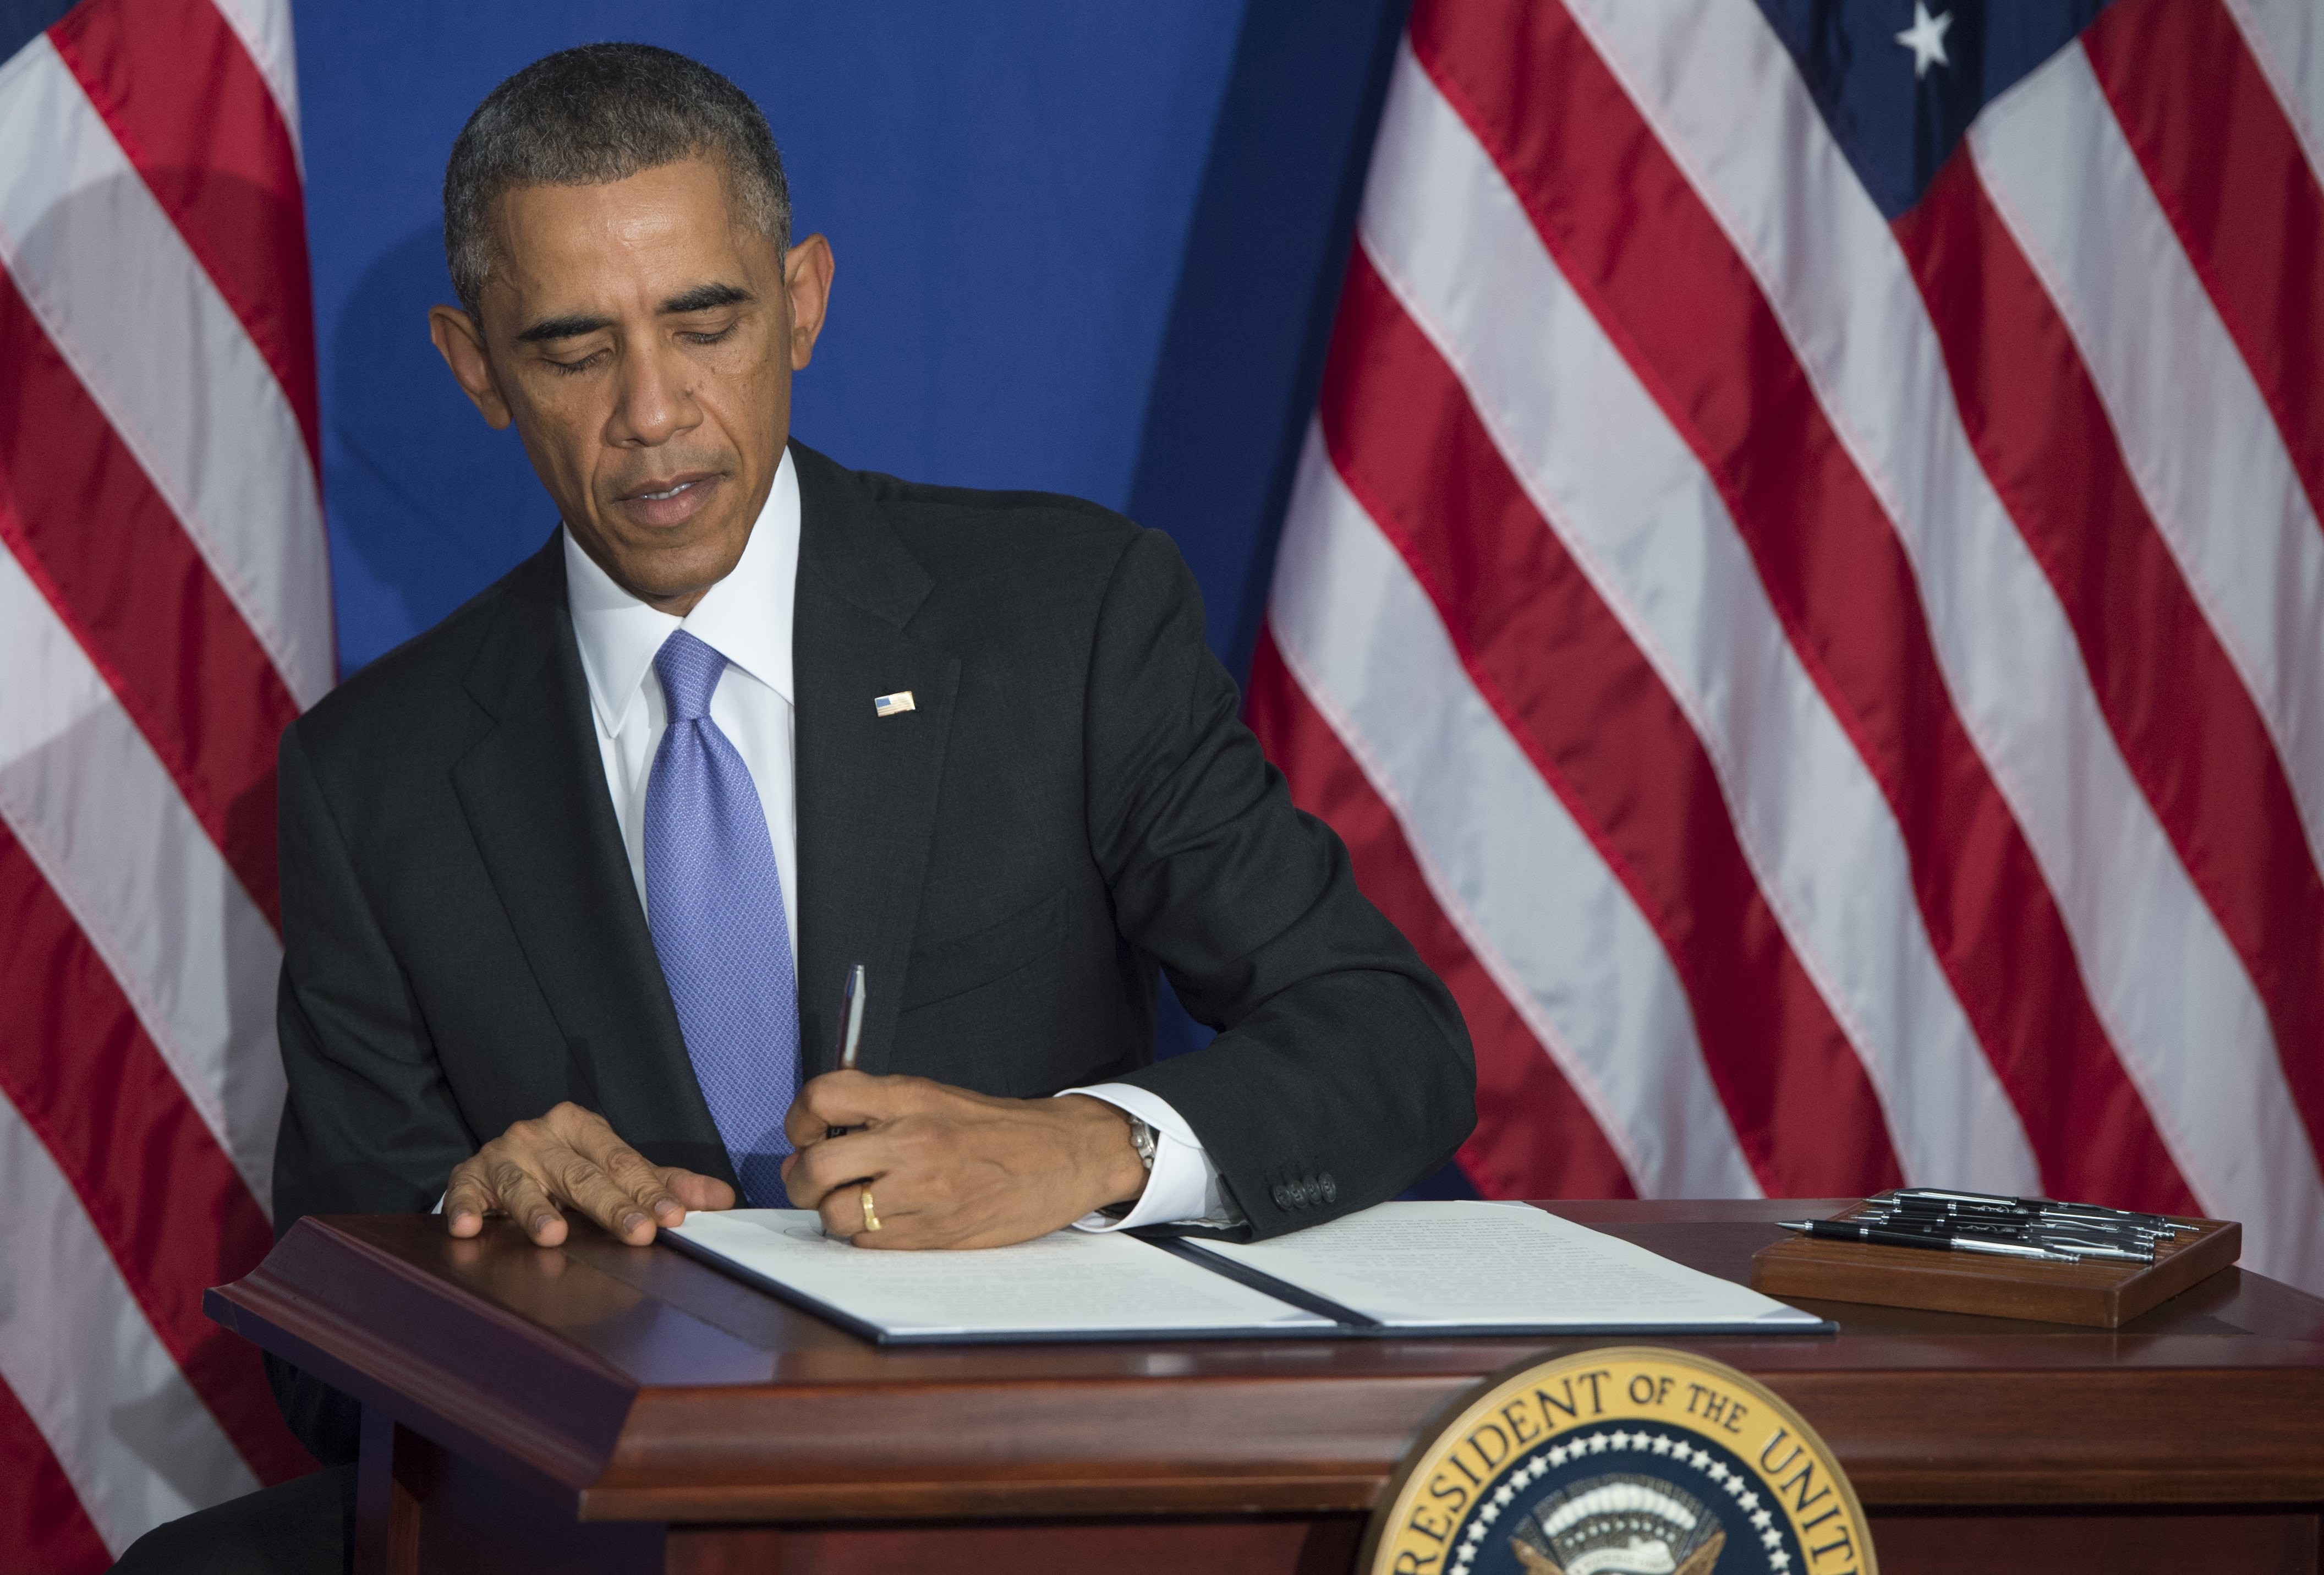 President Barack Obama signs an Executive Order to implement enhanced security measures on consumers' financial security following remarks at the Consumer Financial Protection Bureau (CFPB) in Washington, DC, October 17, 2014. (SAUL LOEB&mdash;AFP/Getty Images)